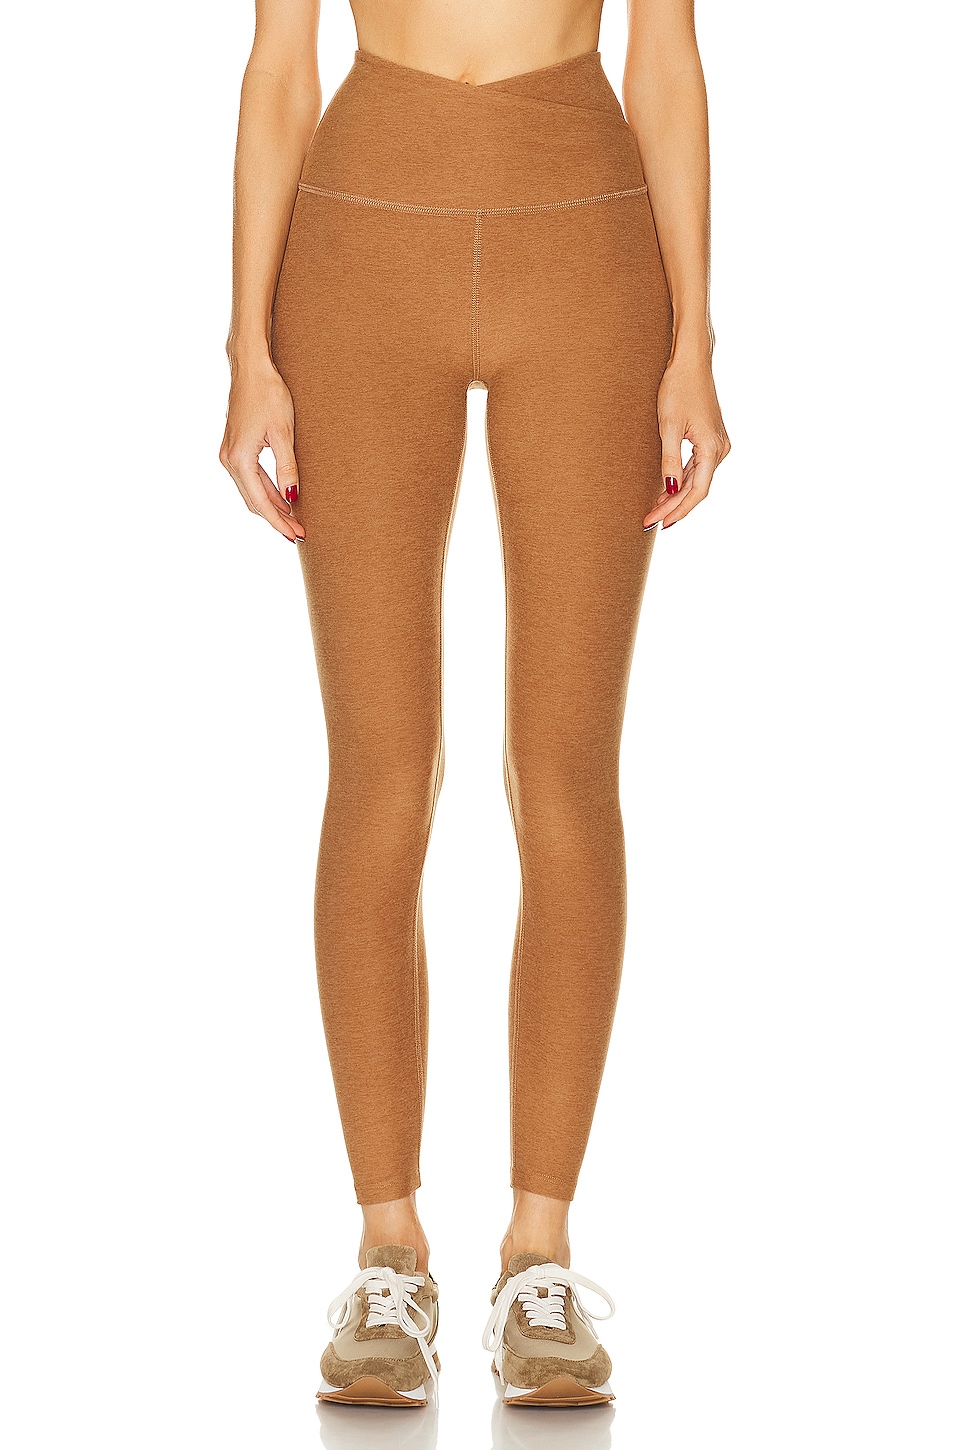 Image 1 of Beyond Yoga Spacedye At Your Leisure High Waisted Midi Legging in Caramel Toffee Heather